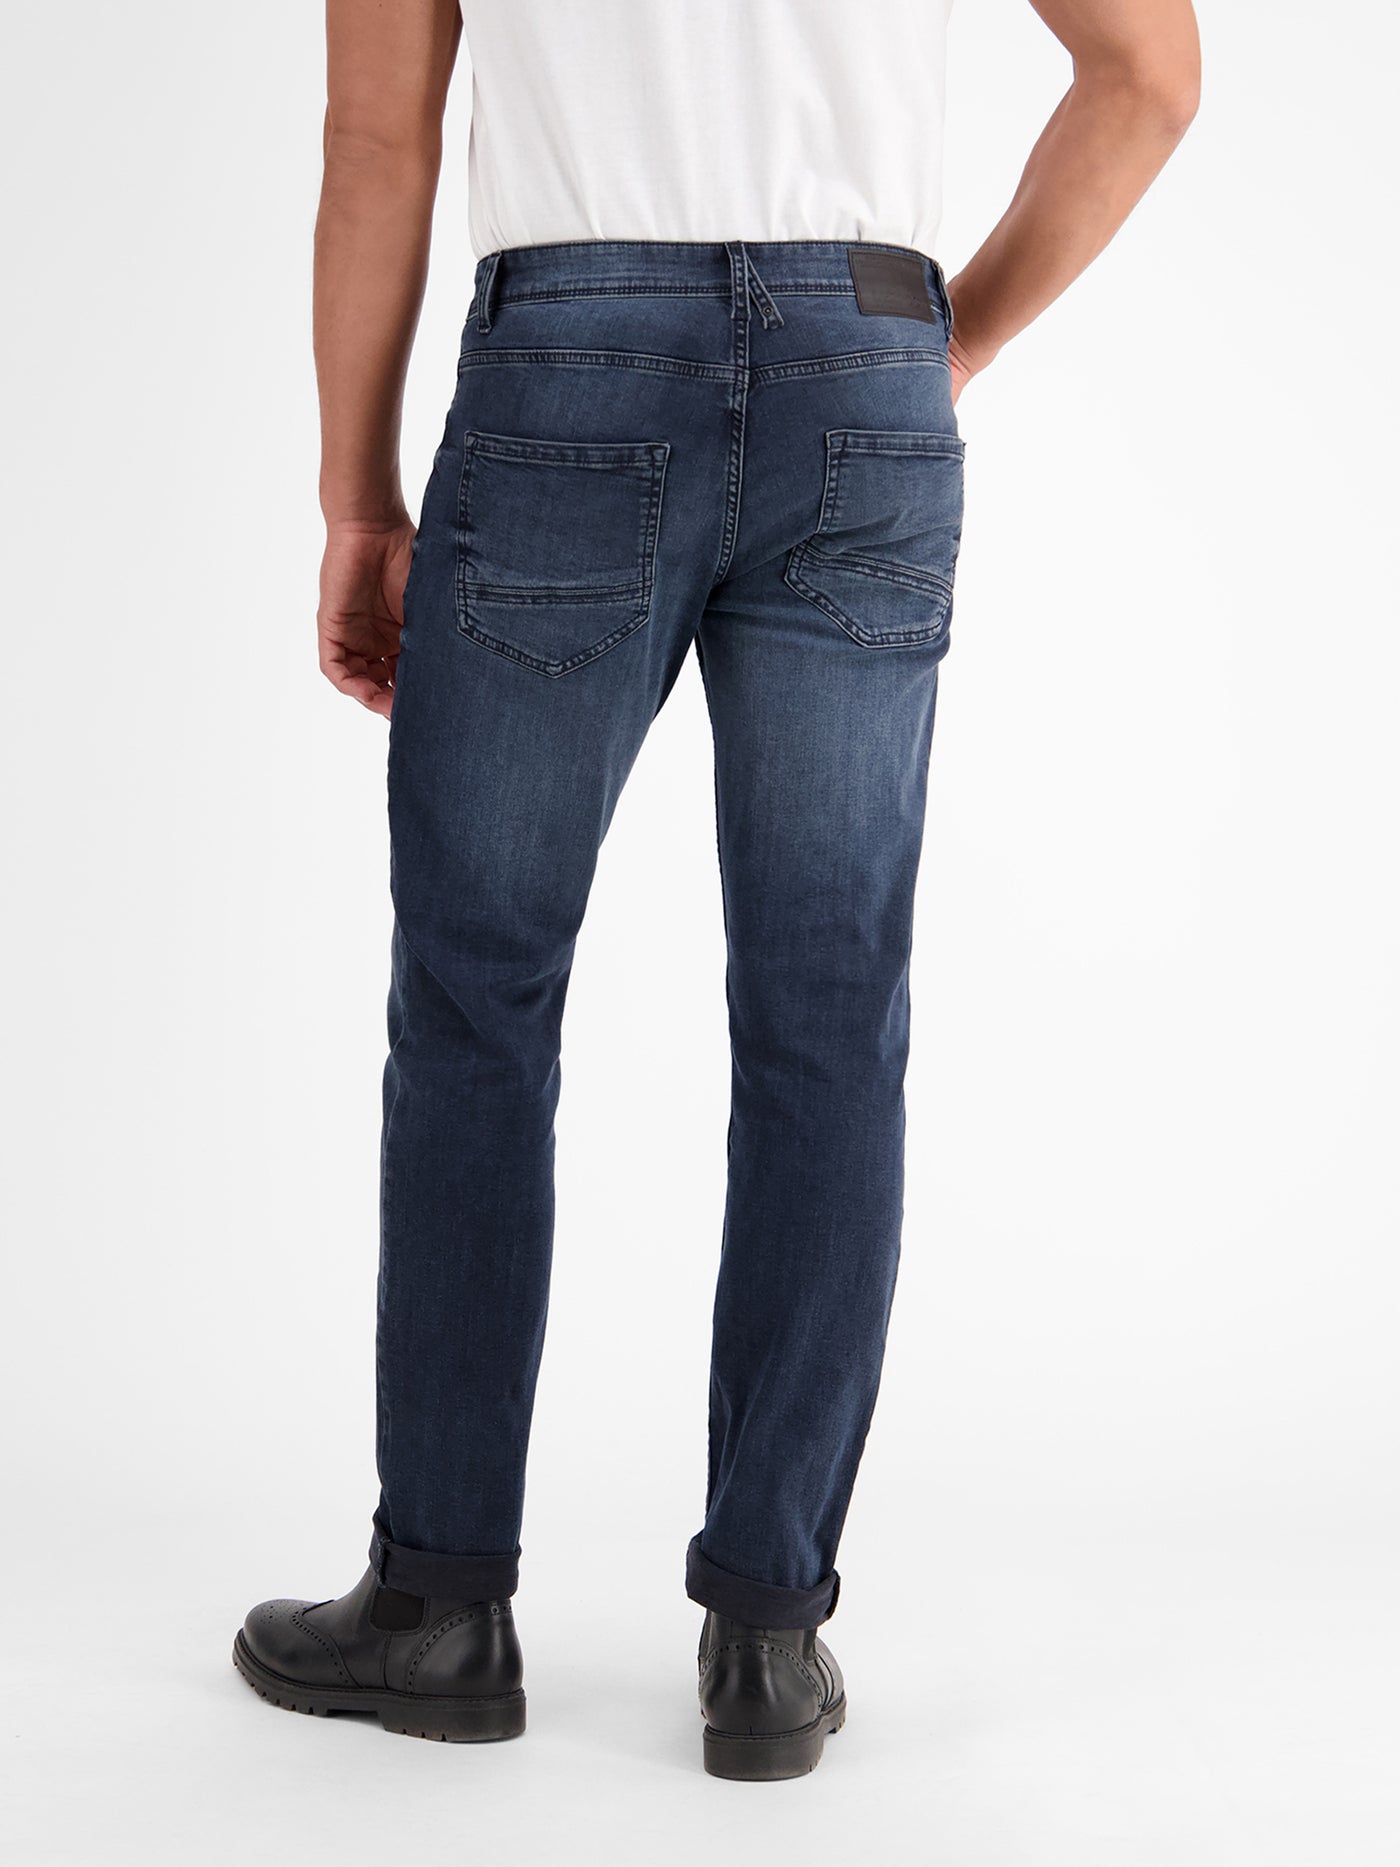 BAXTER 5-POCKET denim style, relaxed fit